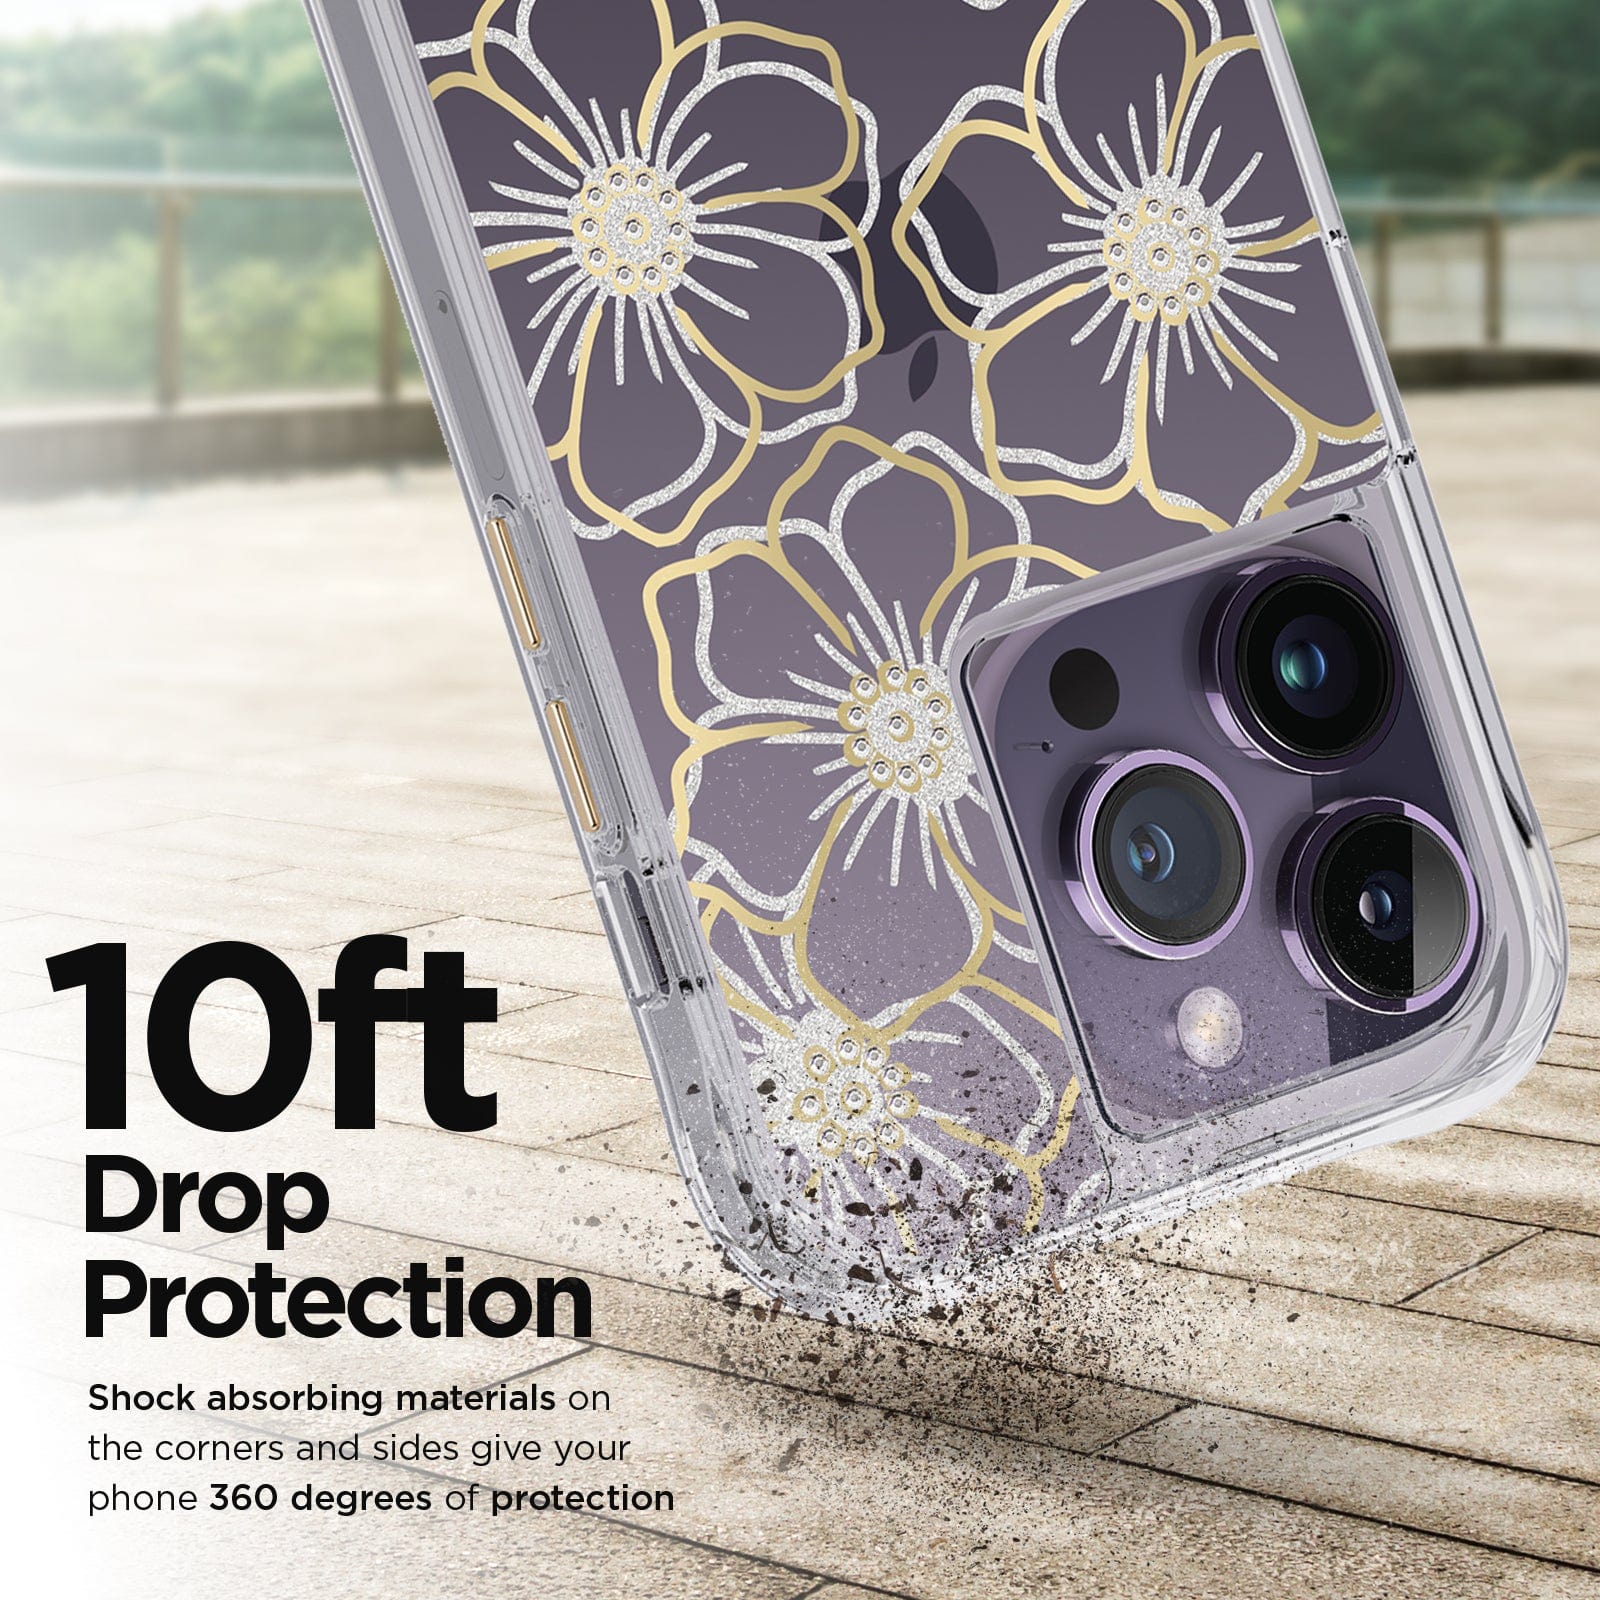 10ft DROP PROTECTION. SHOCK ABSORBING MATERIALS ON THE CORNERS AND SIDES GIVE YOUR PHONE 360 DEGREES OF PROTECTION. 